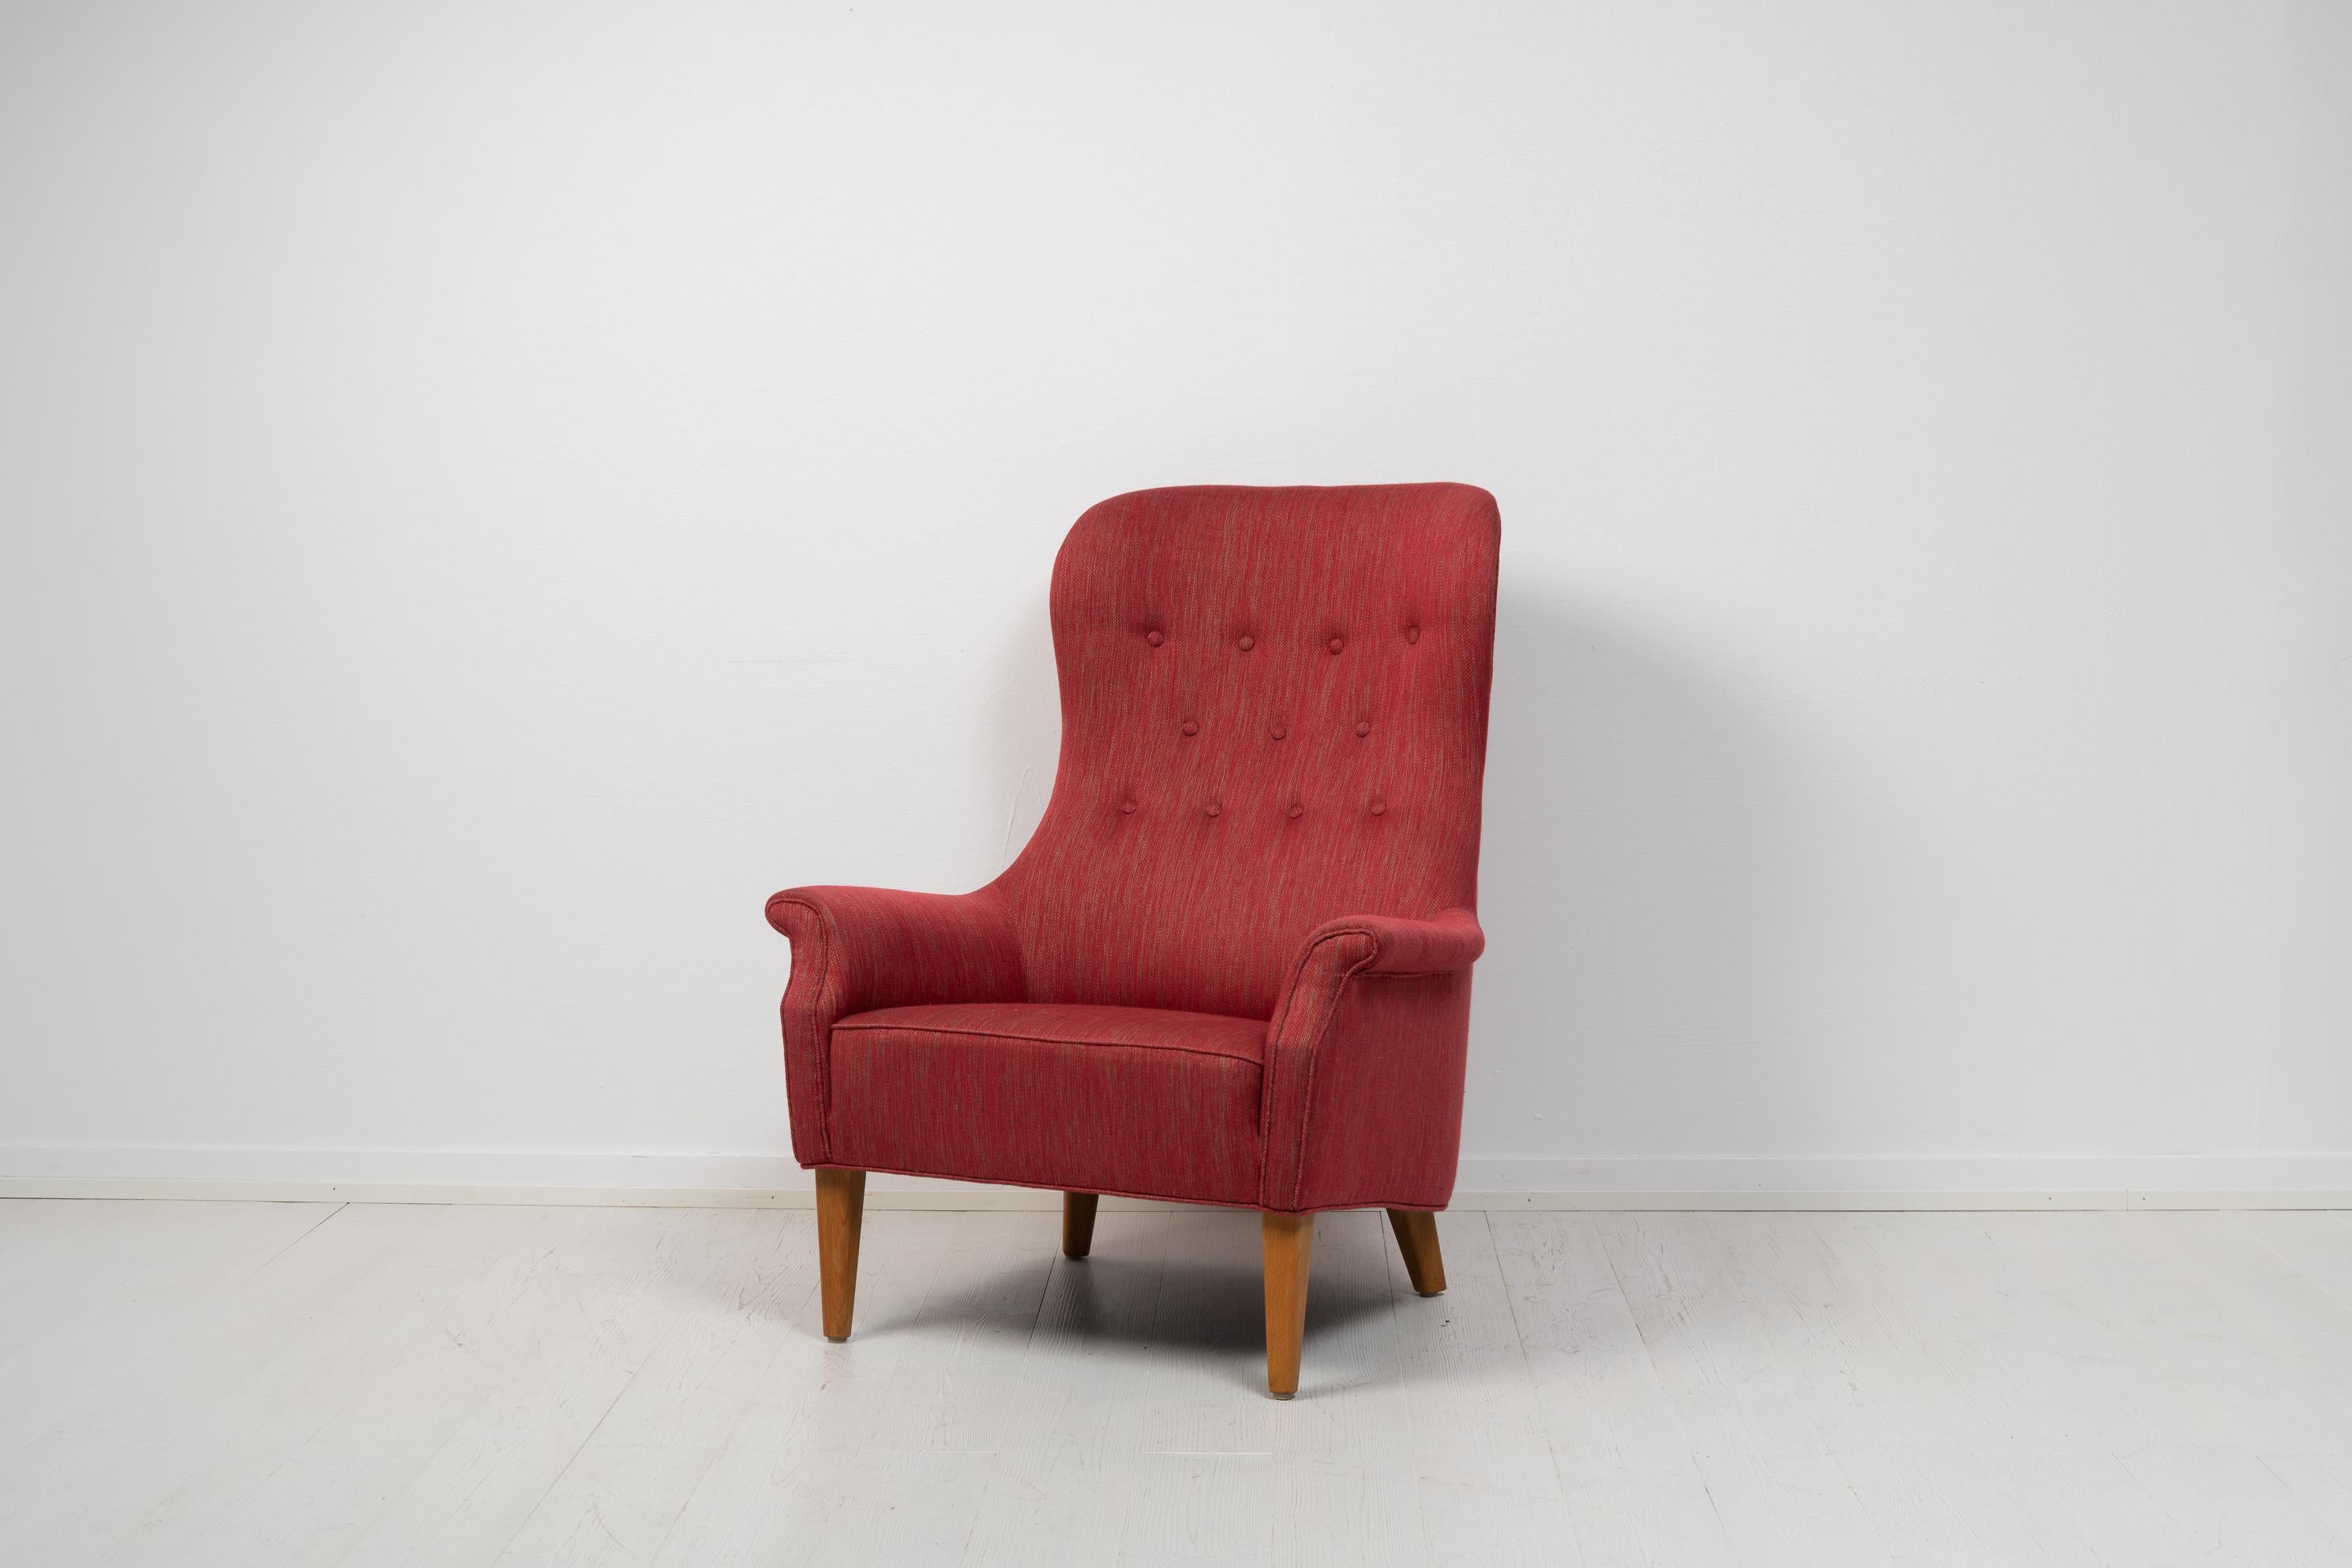 Scandinavian modern armchair by Carl Malmsten from Sweden made during the mid 20th century, around 1960 to 1970. The armchair has the sleek lines and minimal design typical to the Scandinavian mid century modern design as well as Carl Malmsten